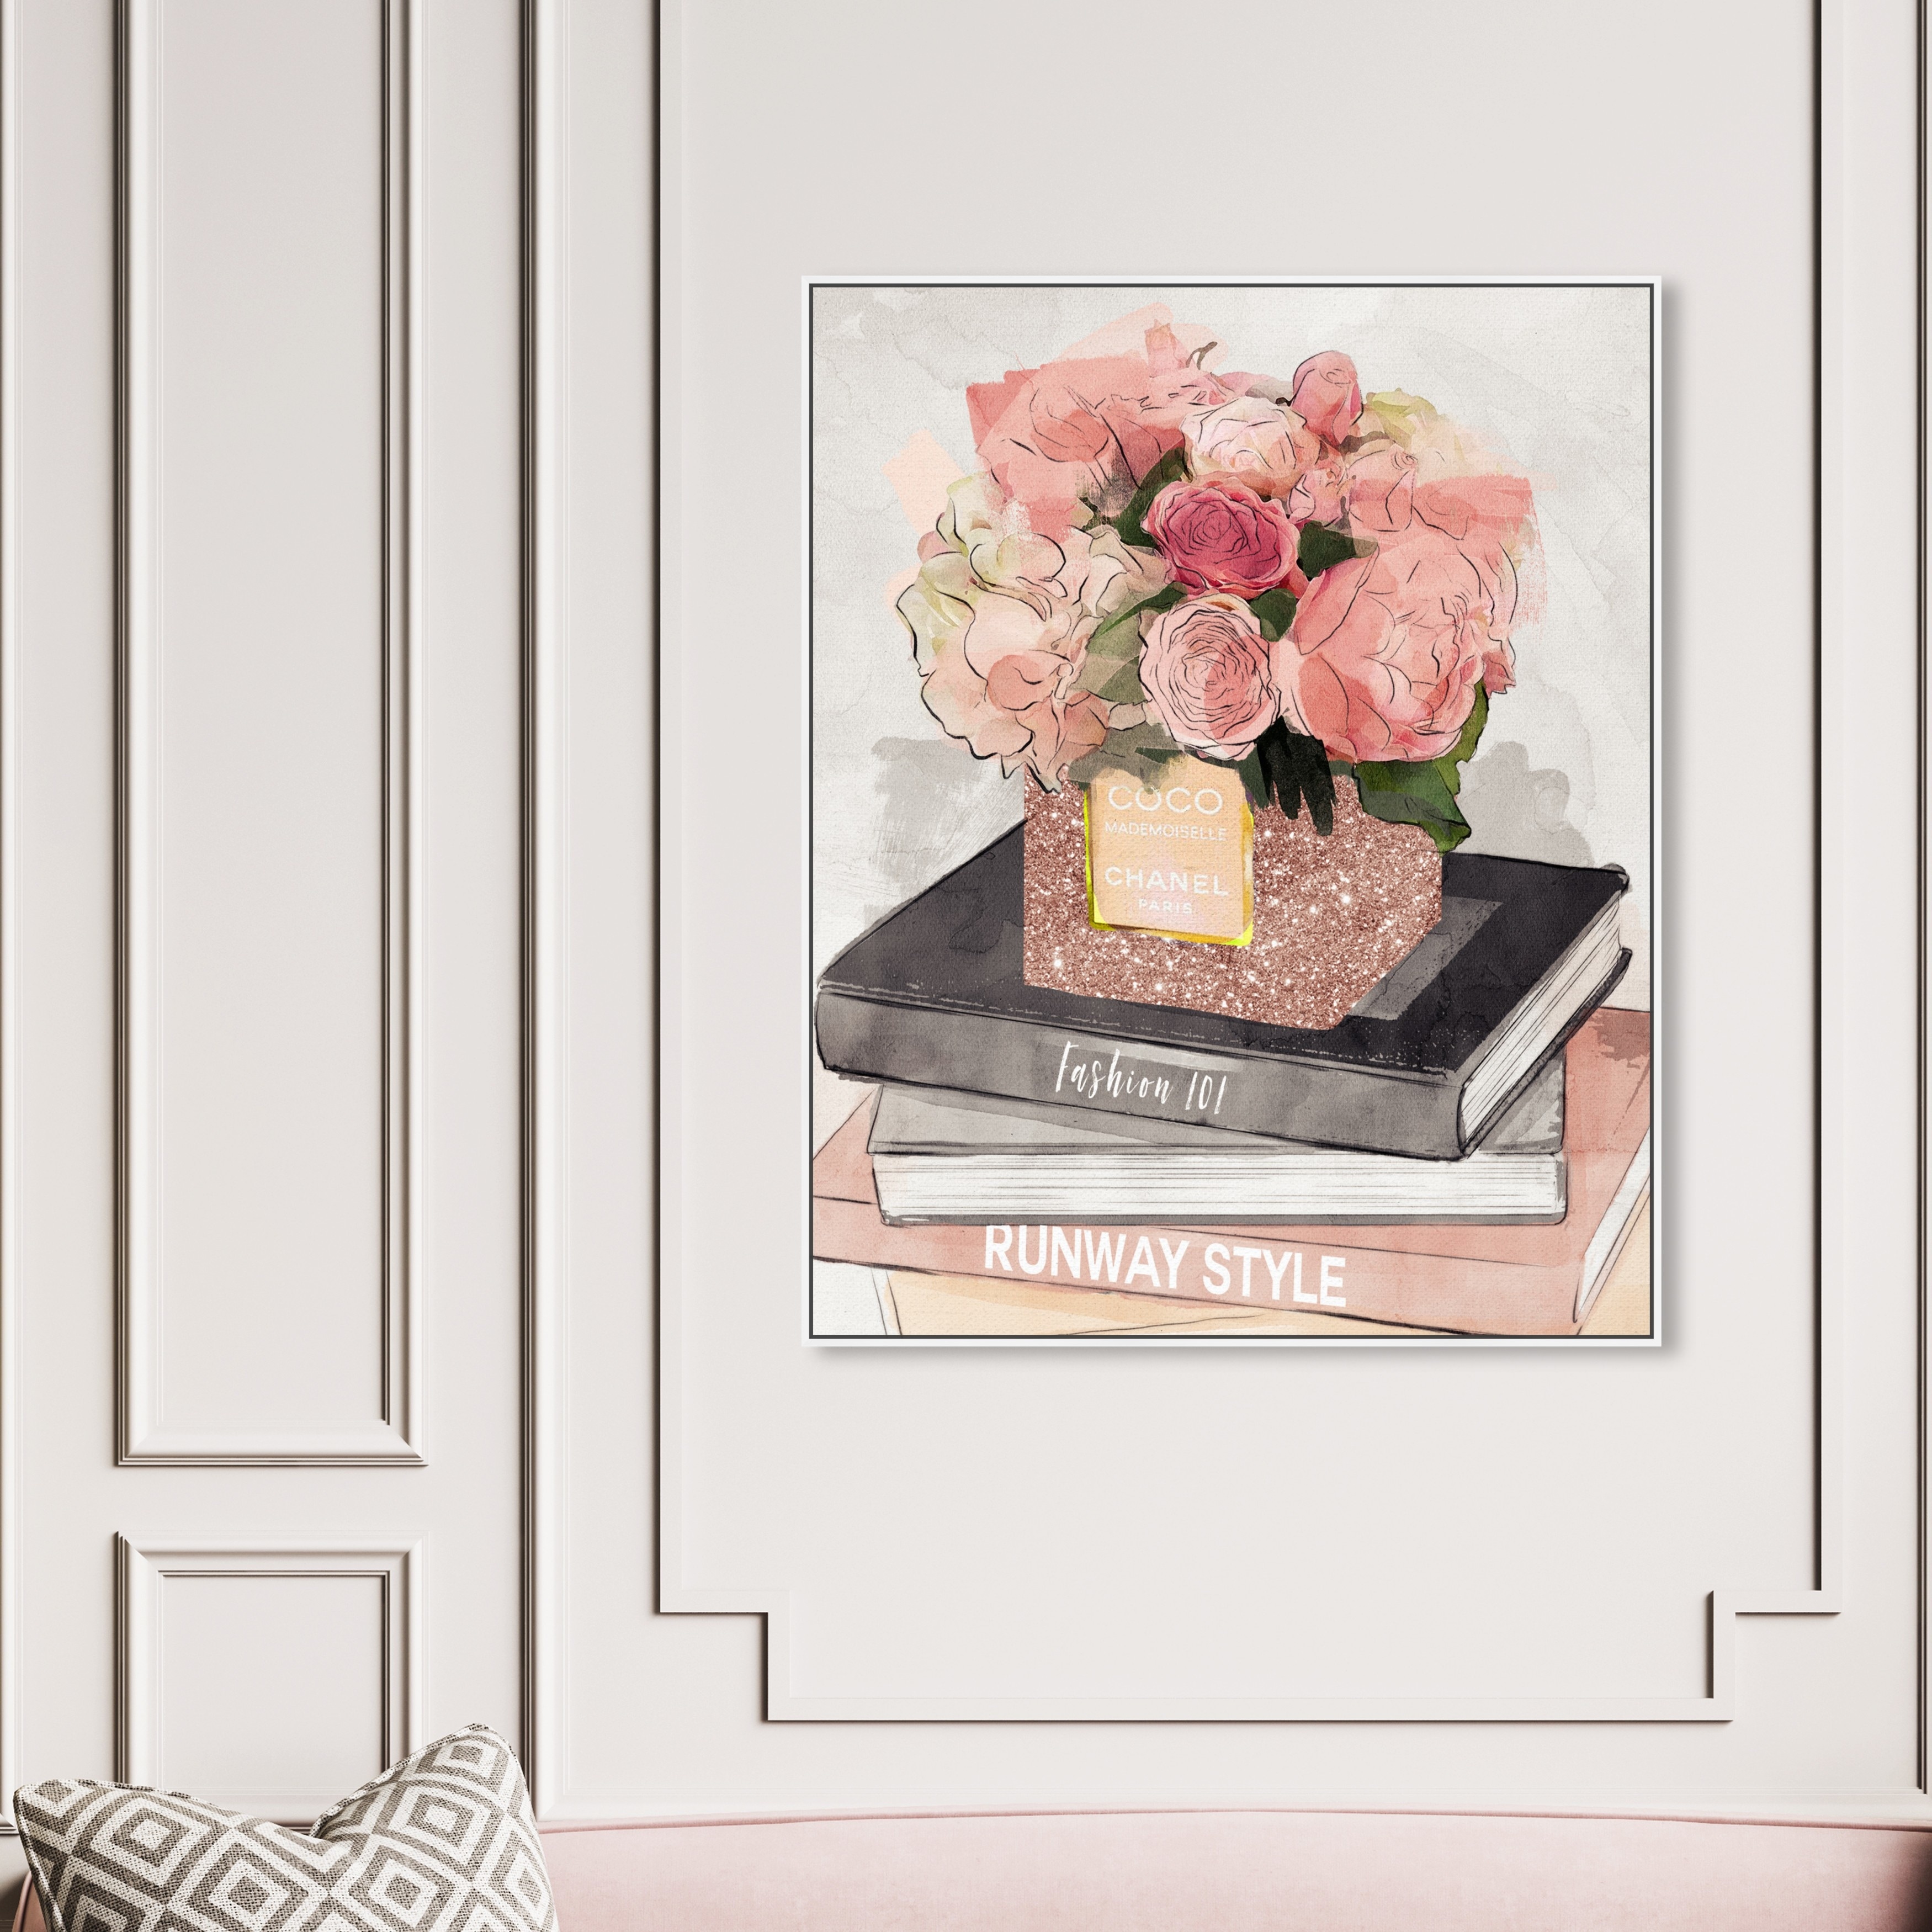 Oliver Gal 'Books and Fragrance' Fashion and Glam Wall Art Framed Canvas  Print Books - Pink, Black - Bed Bath & Beyond - 32481161